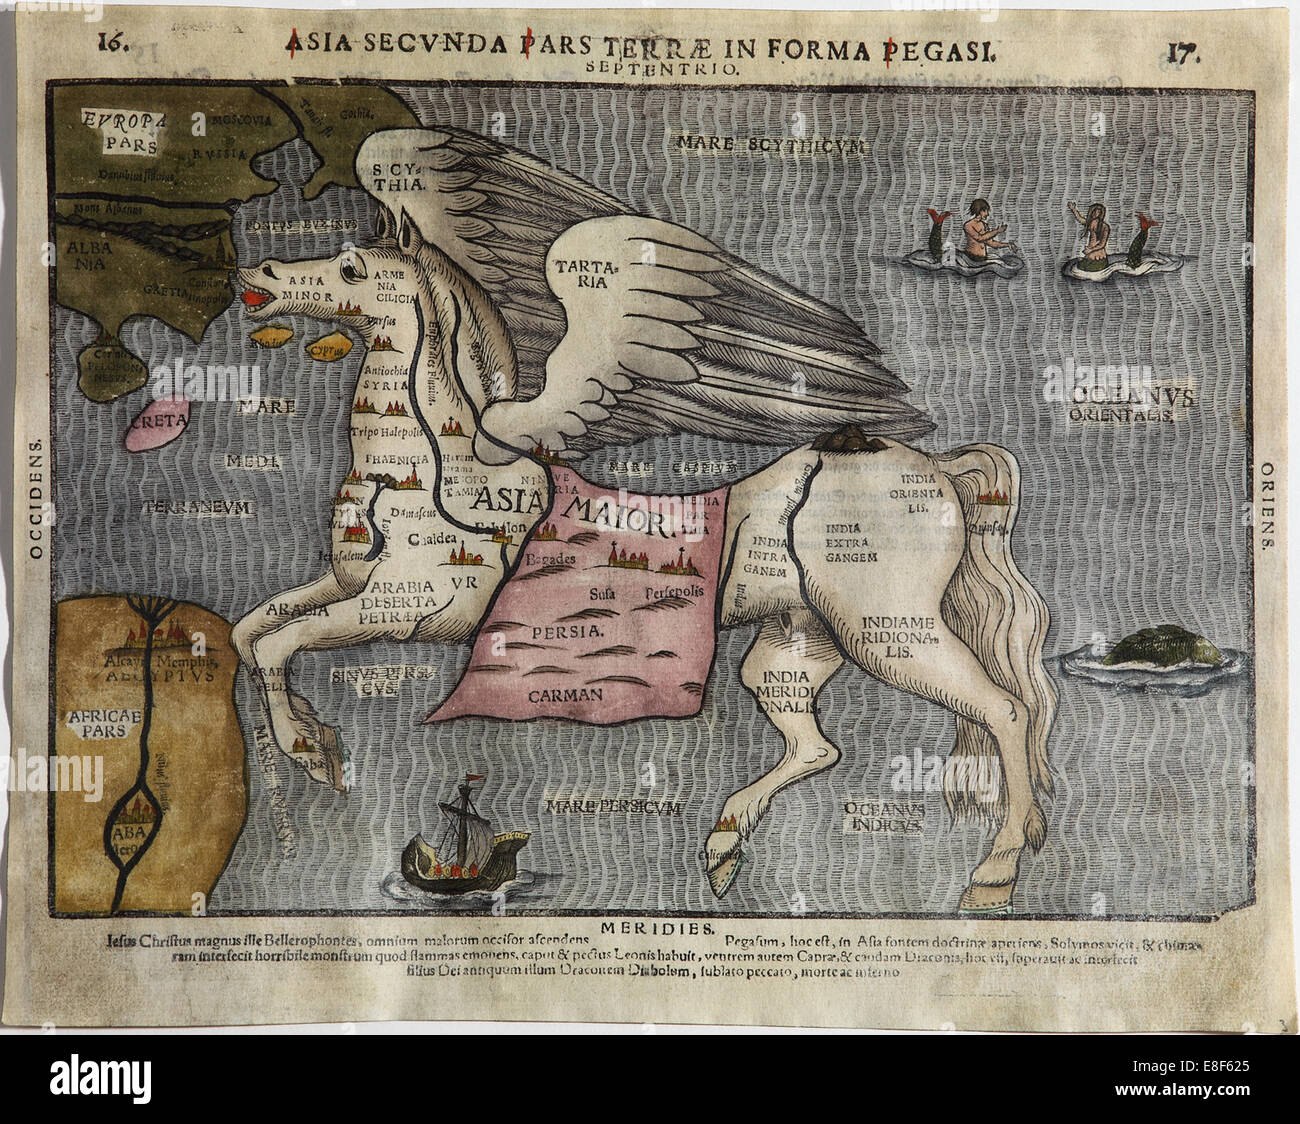 Asia Secunda Pars Terrae in Forma Pegasi (Asia in the Form of Pegasus). Artist: Bünting, Heinrich (1545-1606) Stock Photo